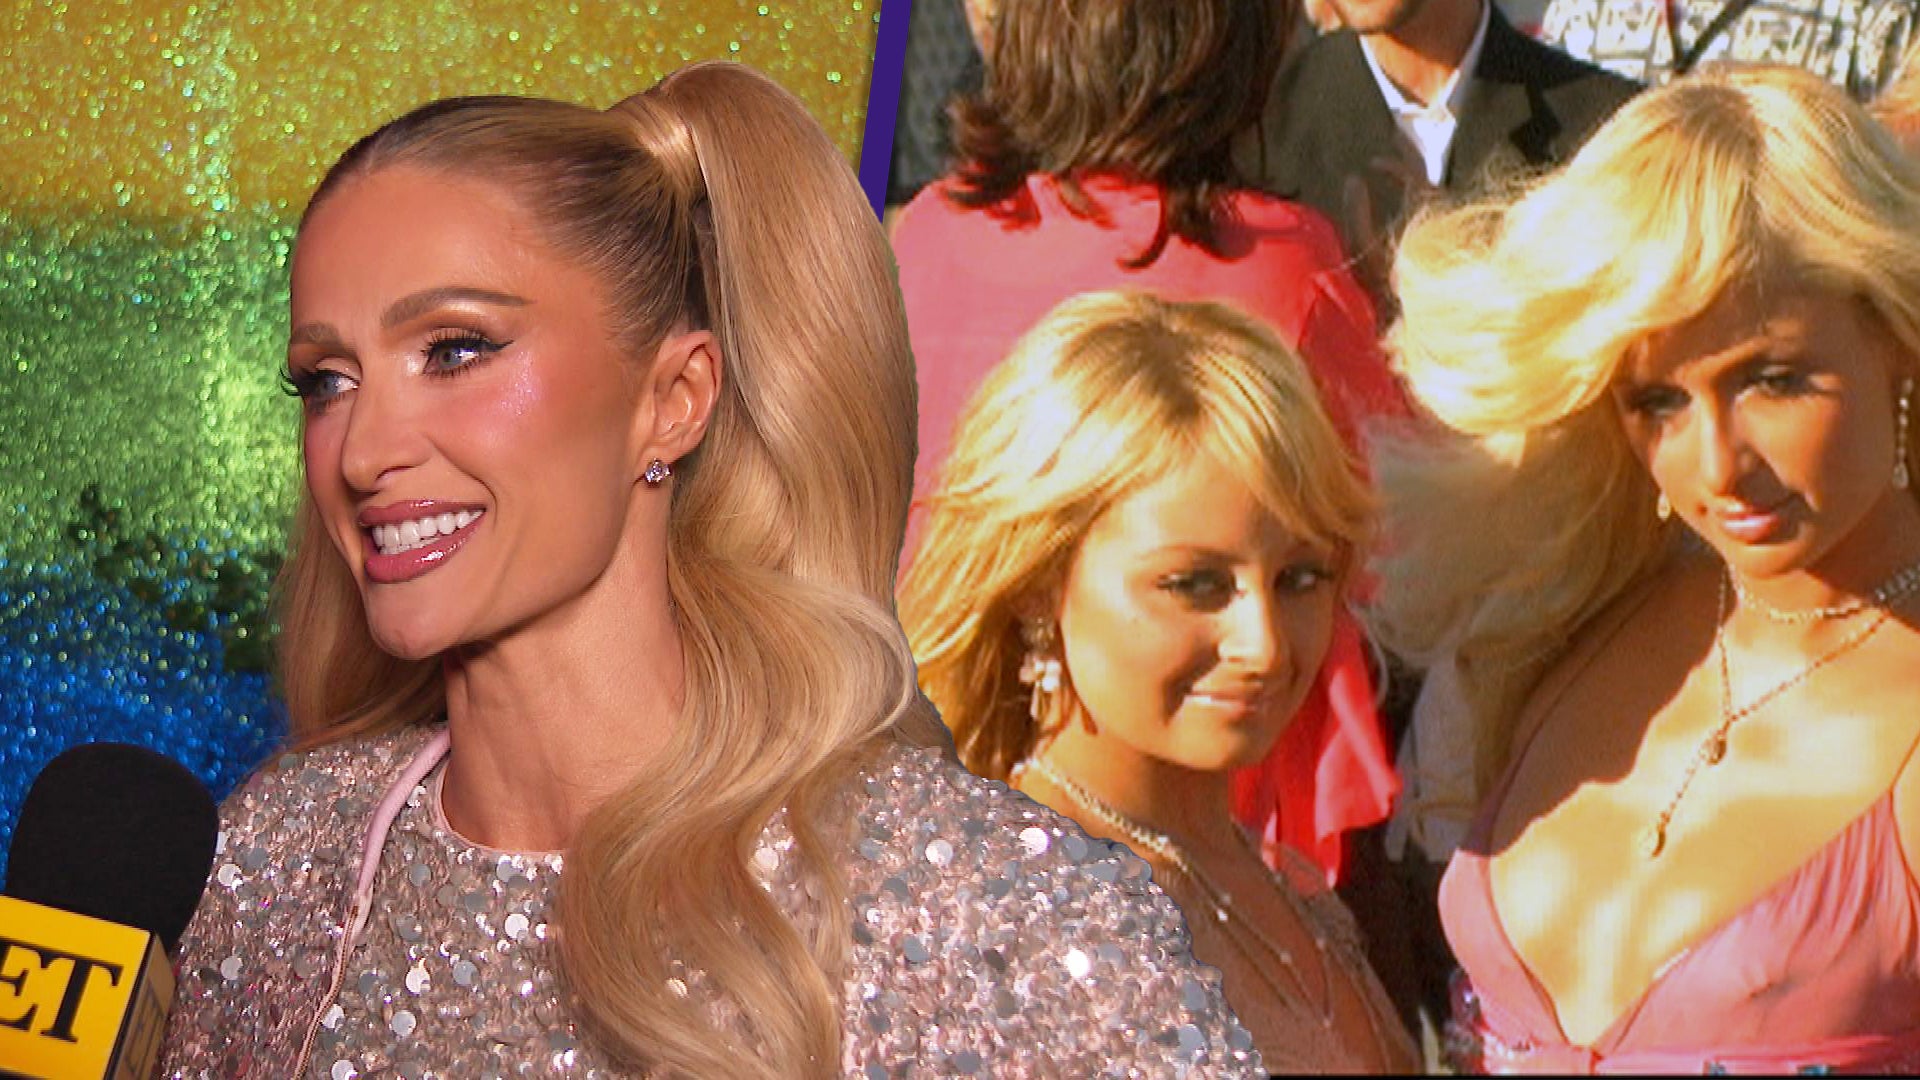 Paris Hilton on Her 'Iconic' Return to Reality TV With Nicole Richie (Exclusive)